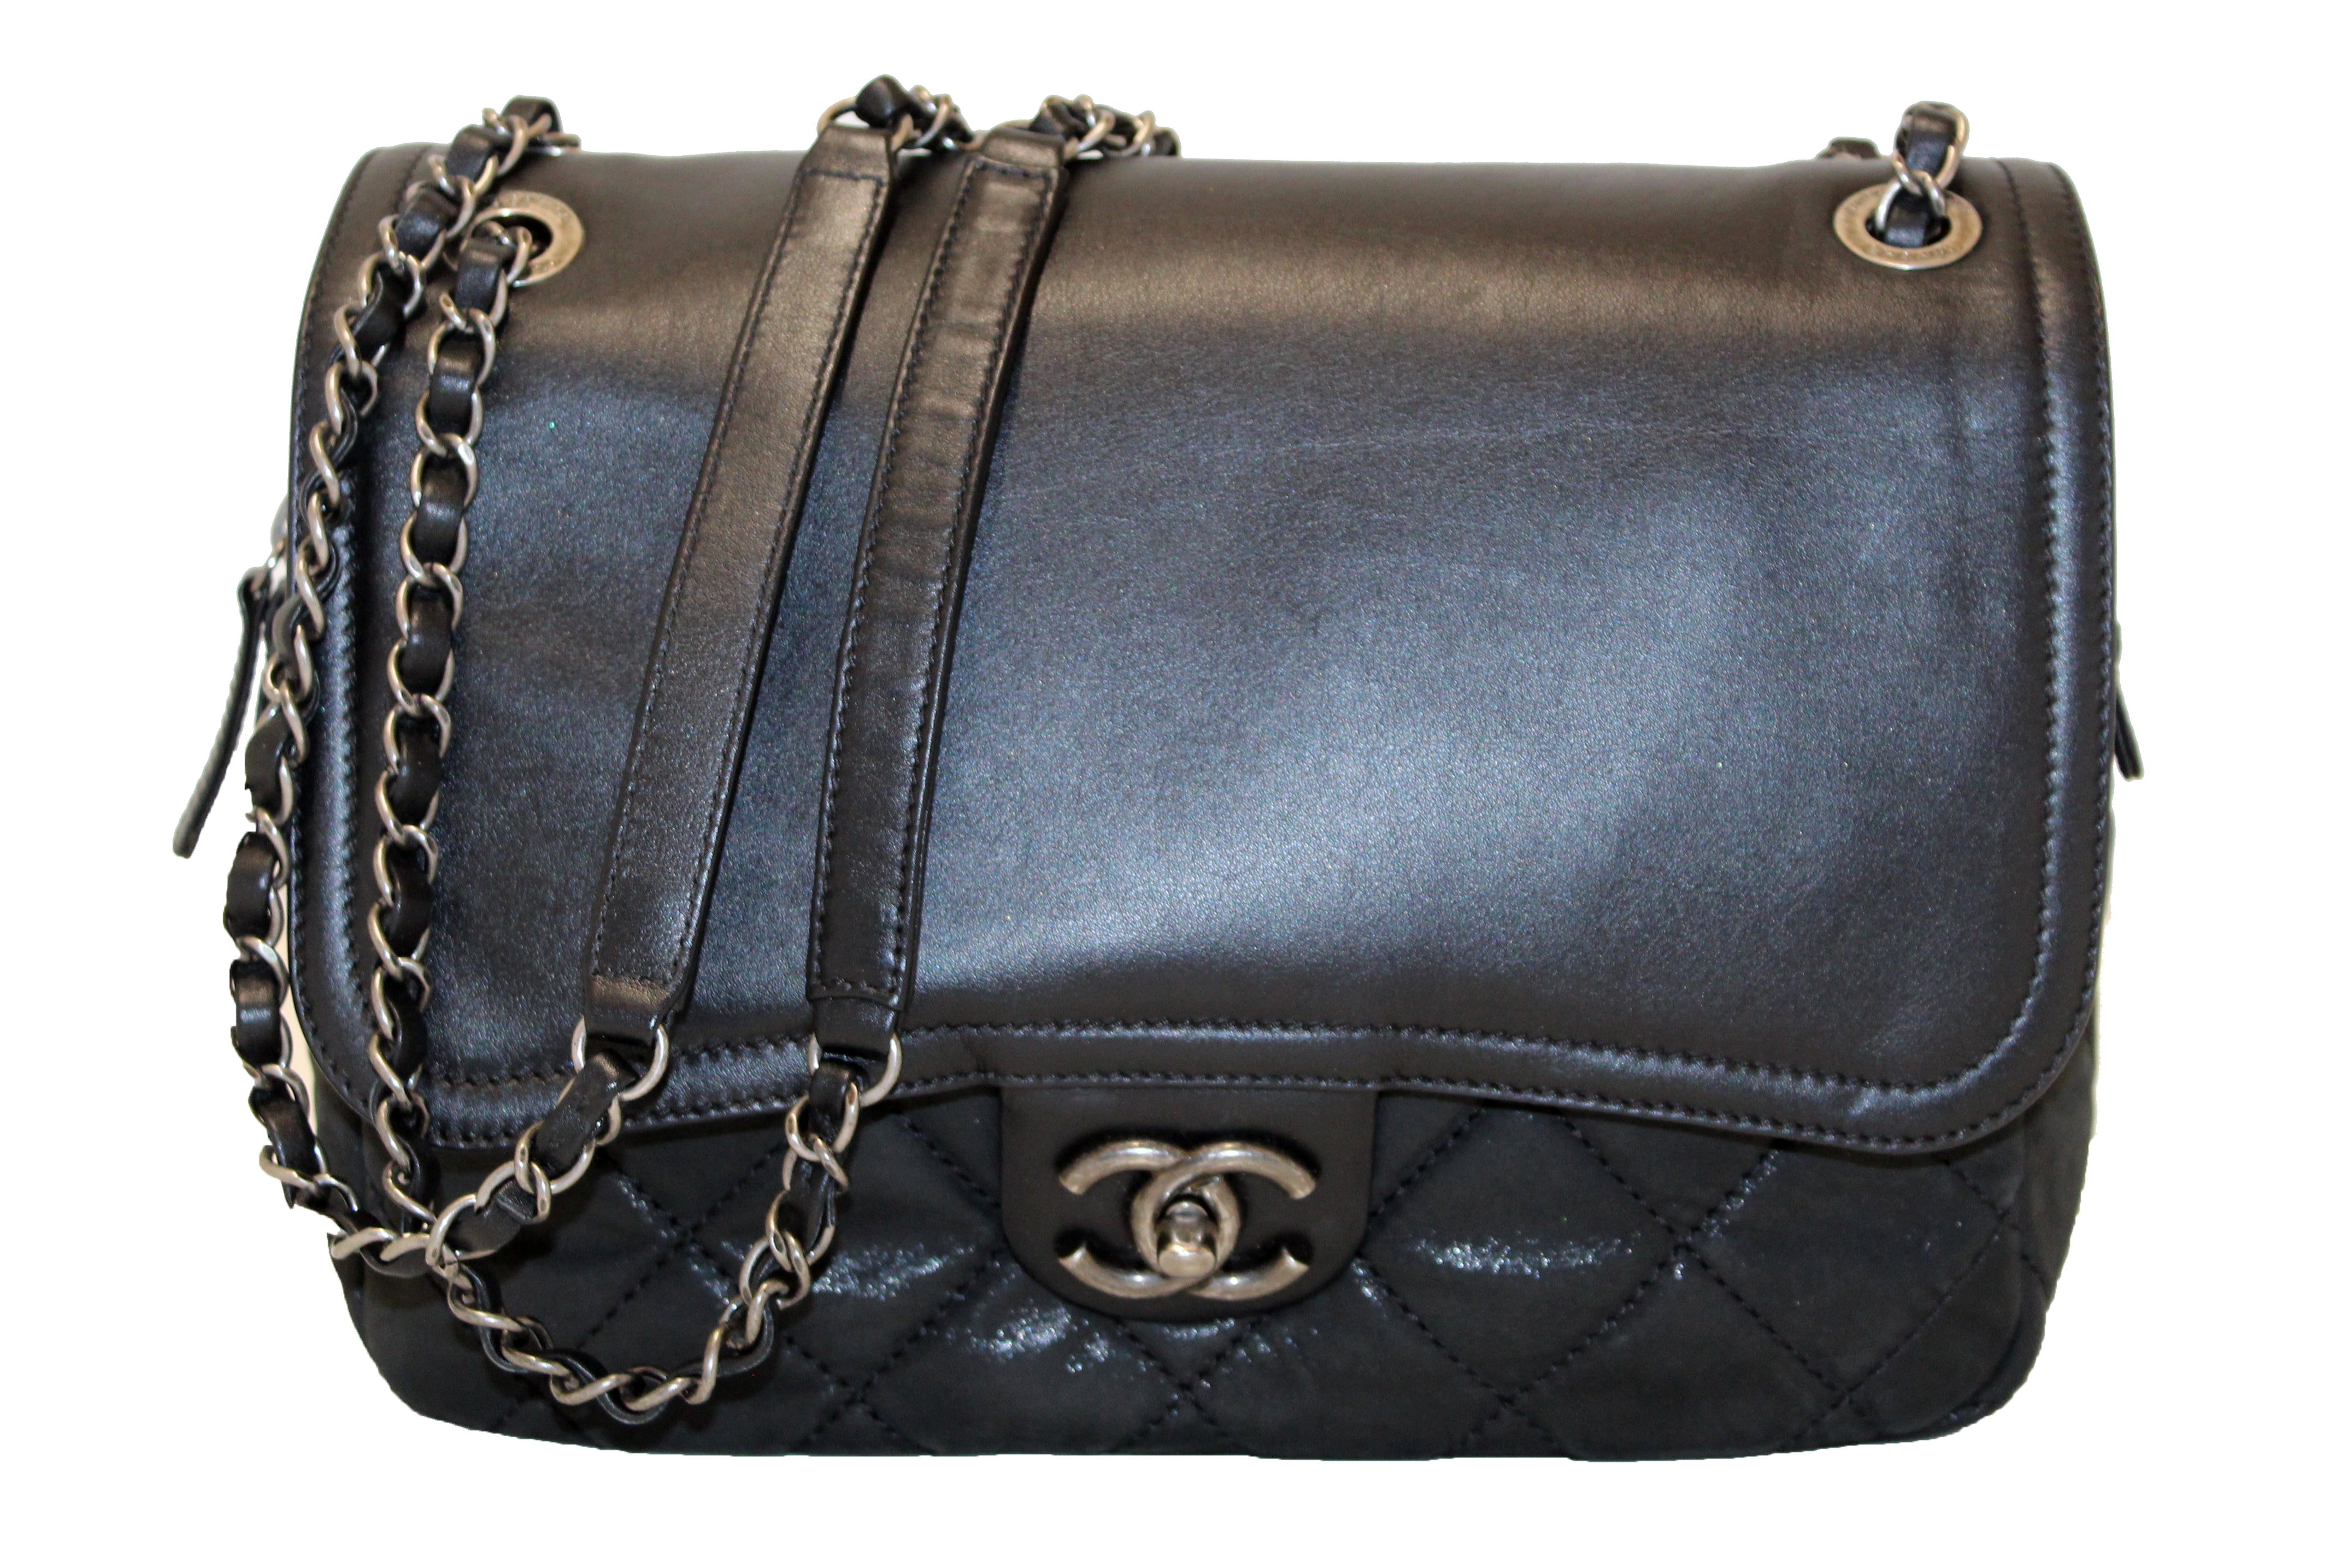 Authentic Chanel Black Irridescent Calfskin In The Mix Shoulder Crossbody bag